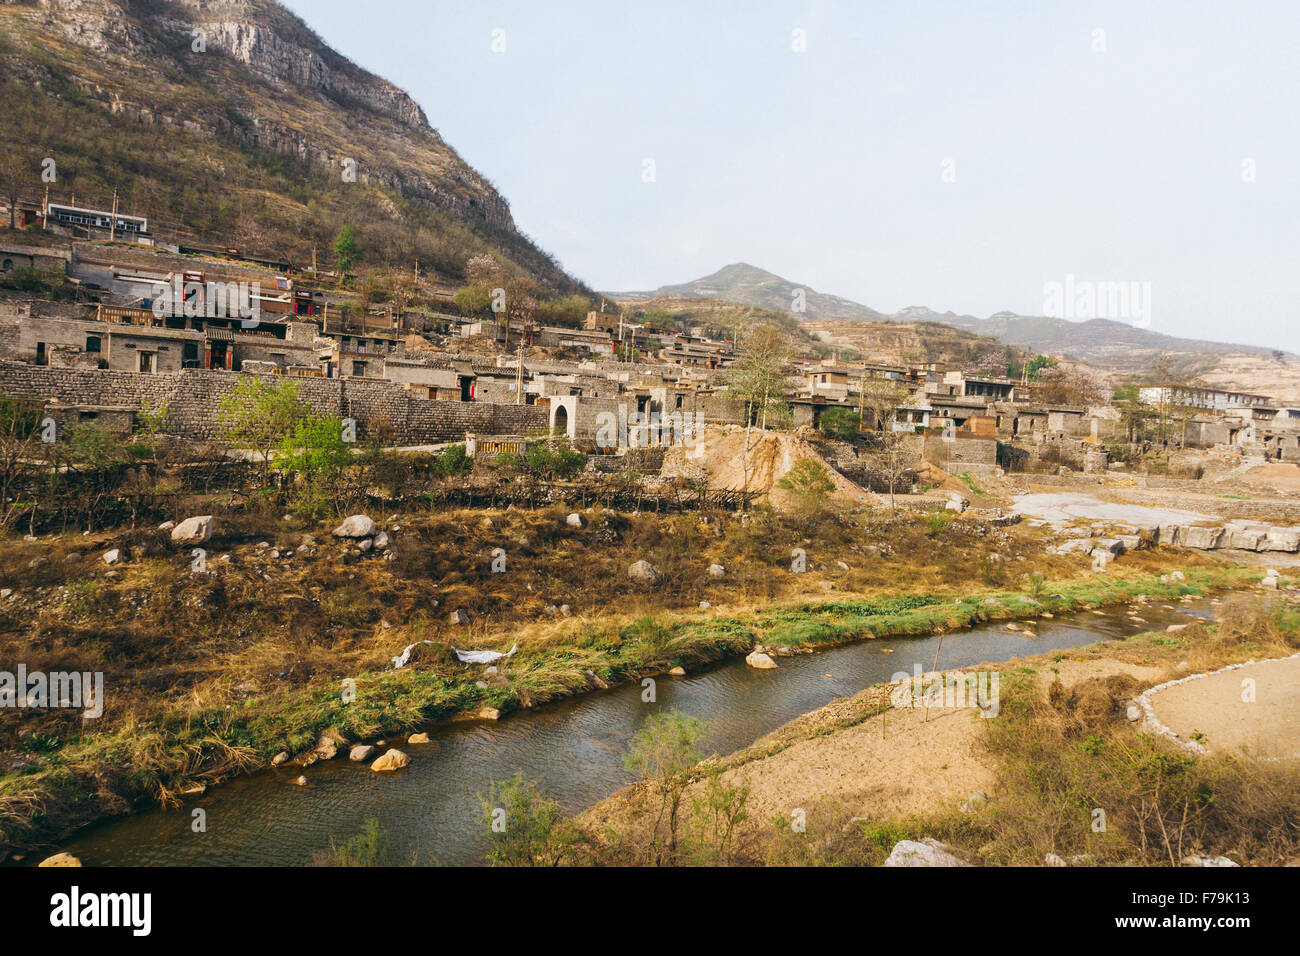 Shanxi Province, China - May, 2013: Chinese poor countryside view in Taihang mountains Stock Photo